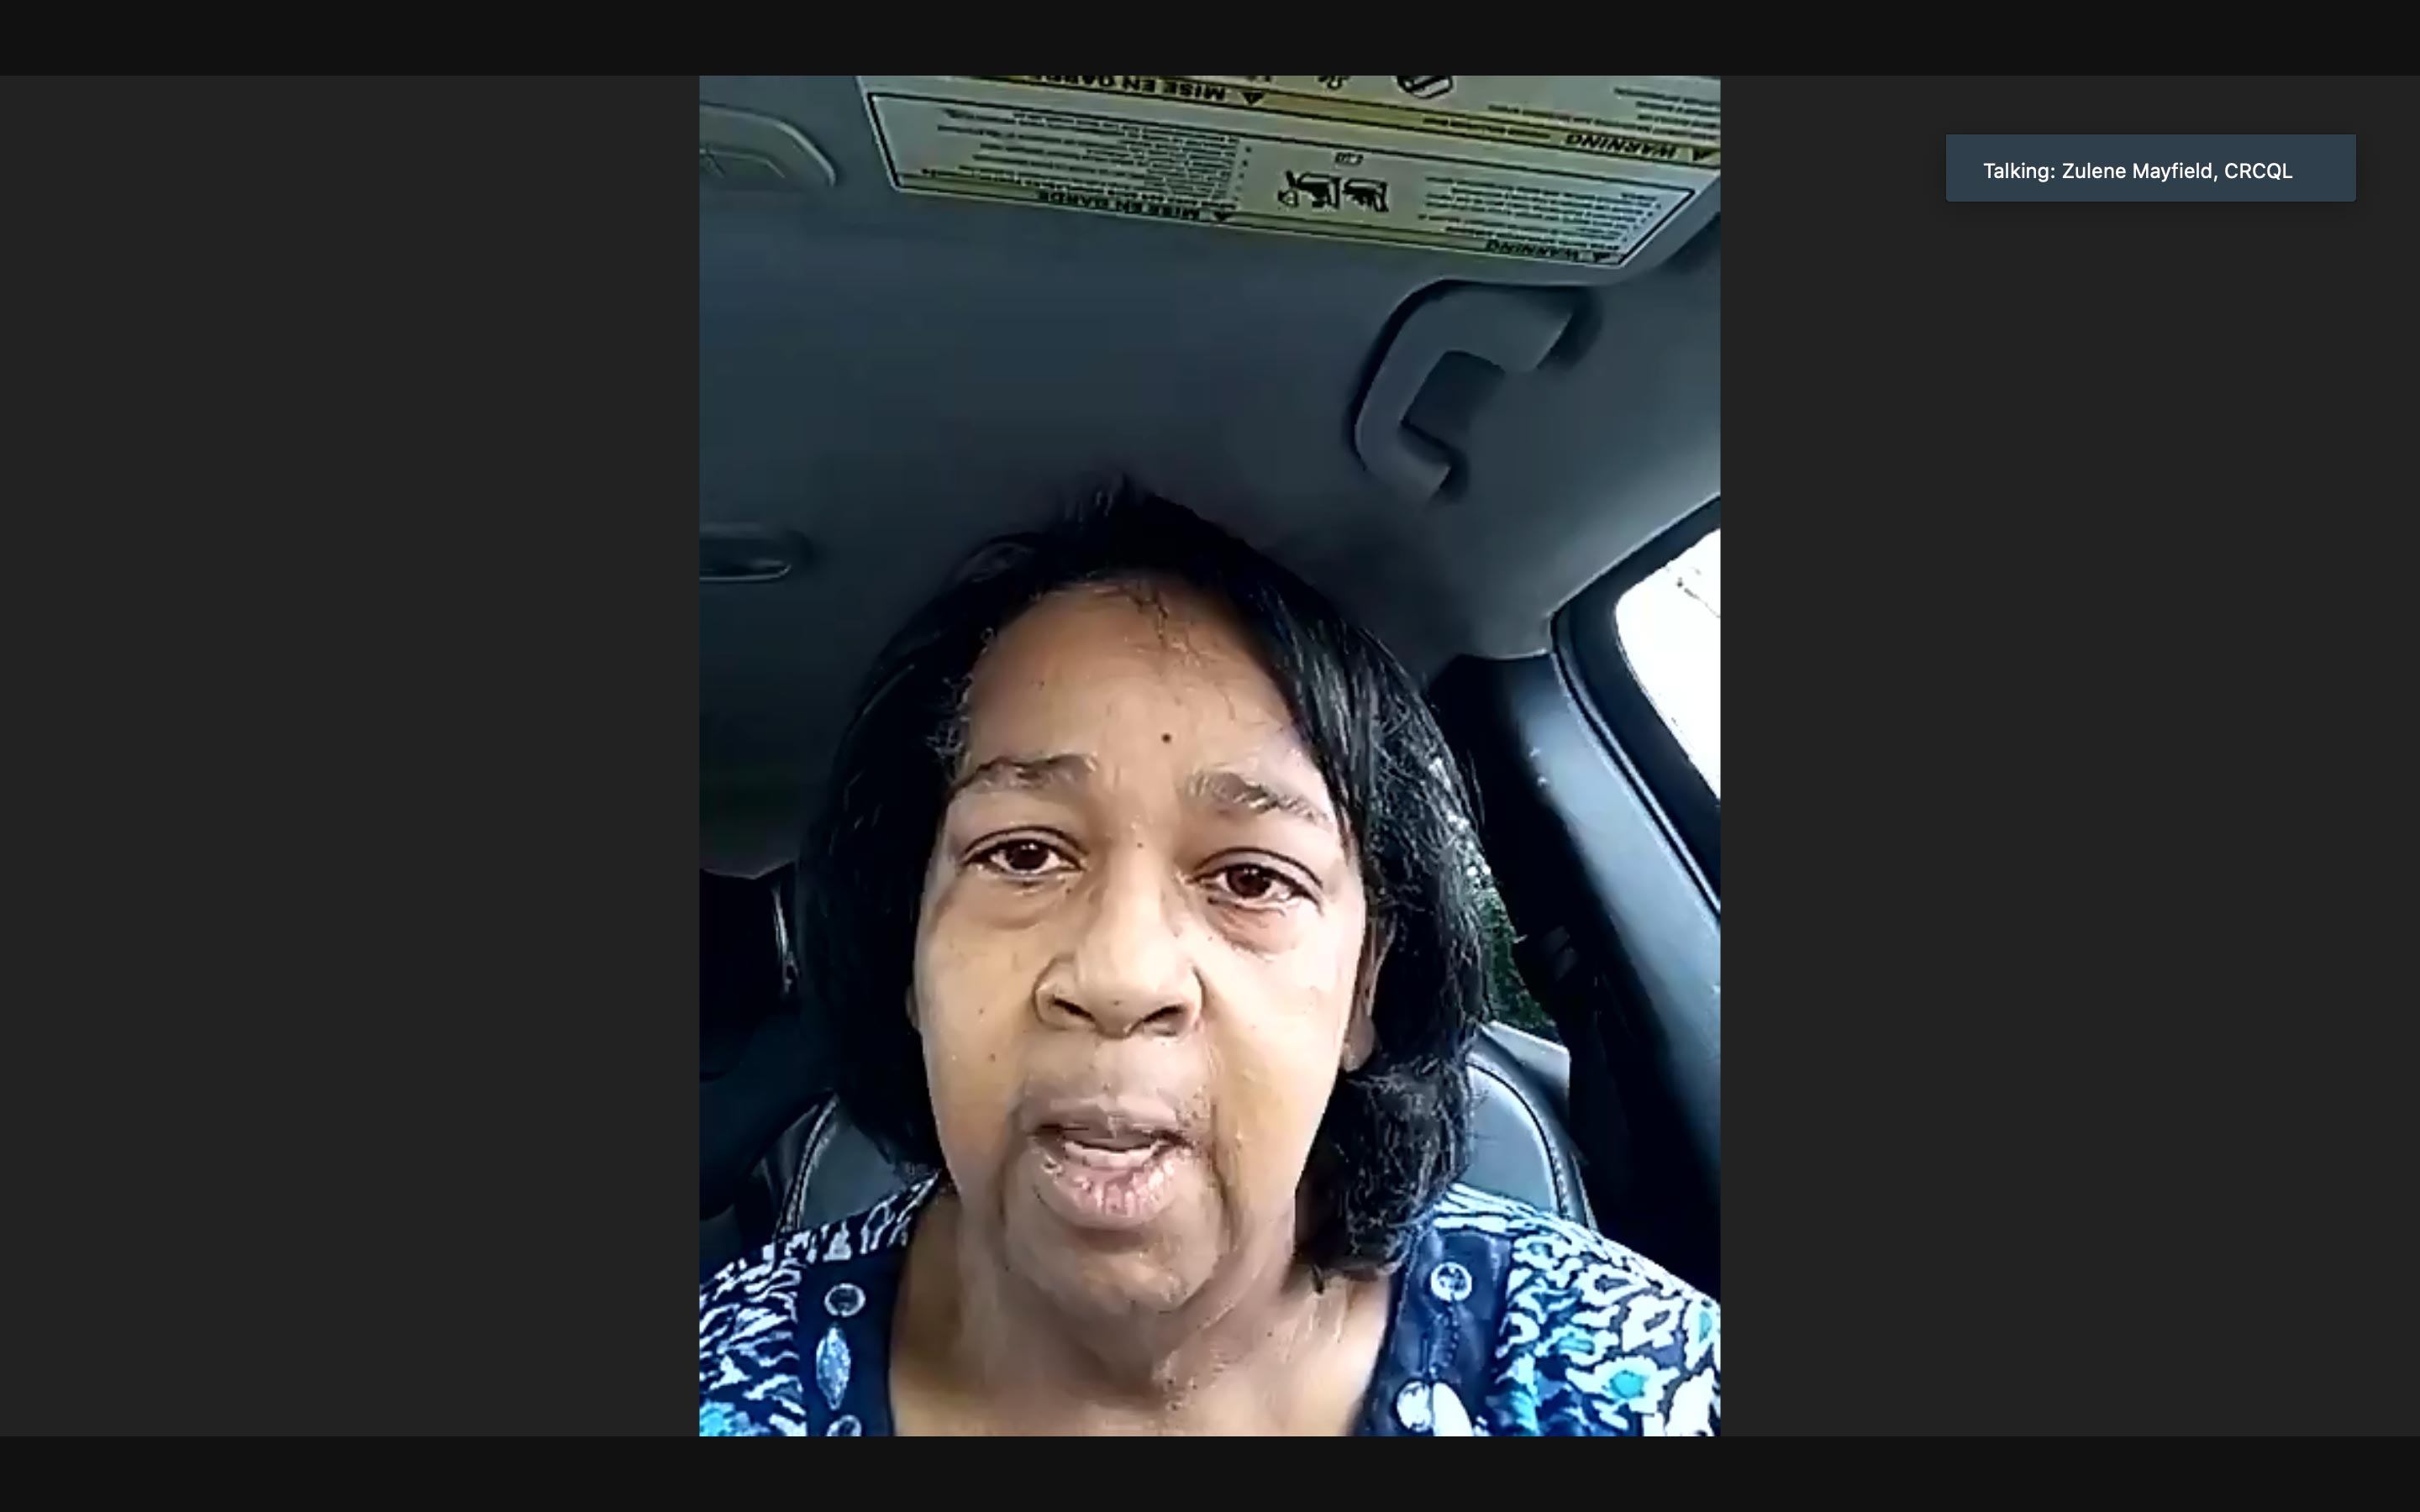 Zulene Mayfield, chair of the Chester Residents Concerned for Quality Living. (Screenshot)